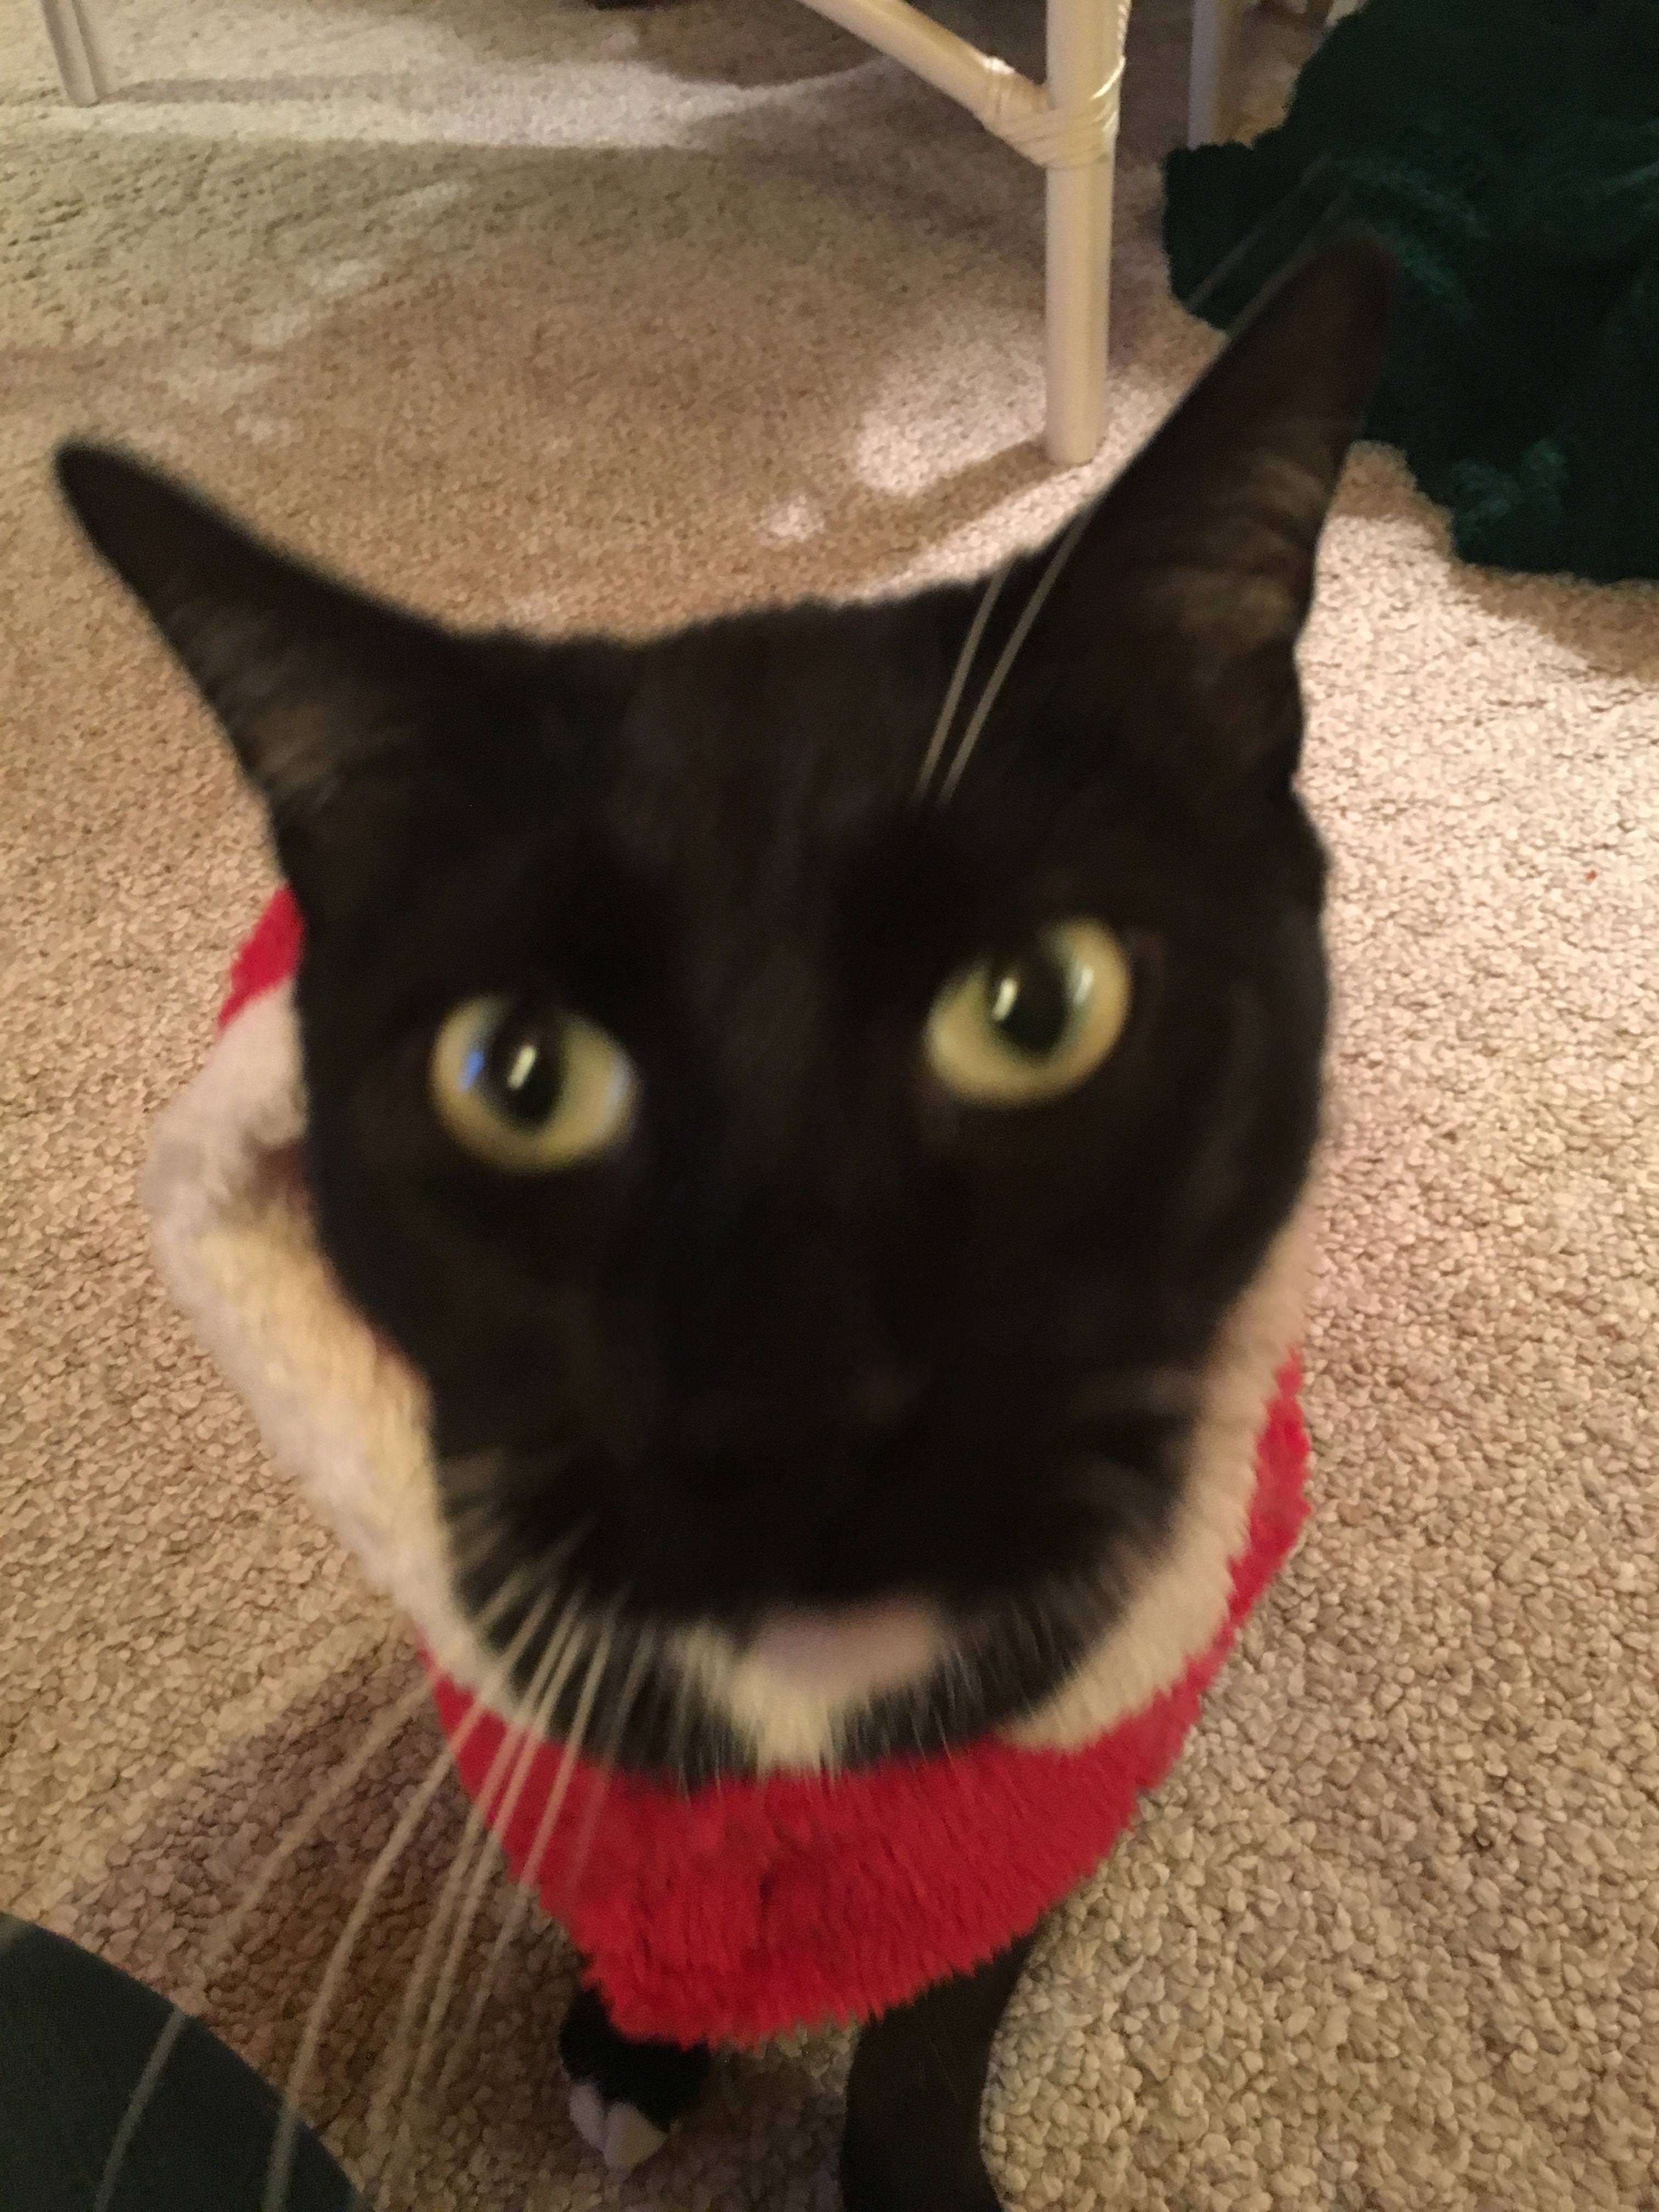 It's my cake day so have photos of my cat in clothes. - Album on Imgur